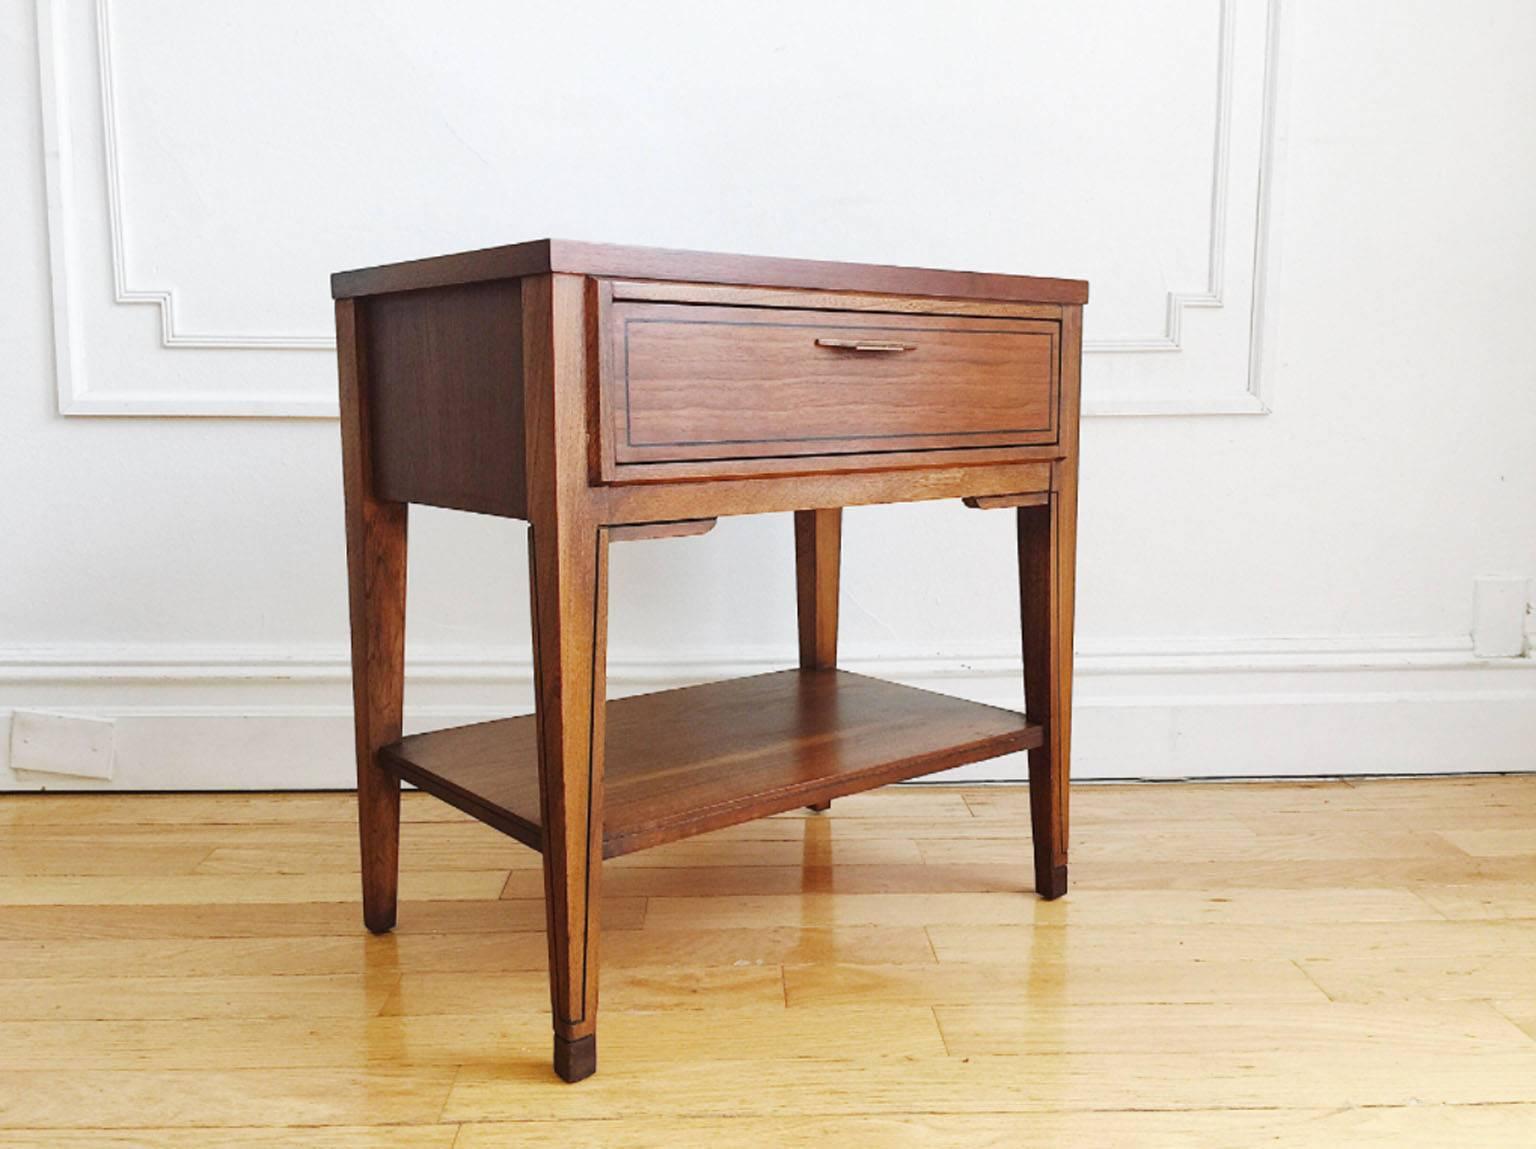 Art Deco-inspired, Mid-Century Modern nightstand, side table or end table from Kent Coffey's 'Tempo' line. Original sculpted pull, inlay detail and contrasting walnut and elmwood. In excellent vintage condition, drawer is clean and slides easily, no